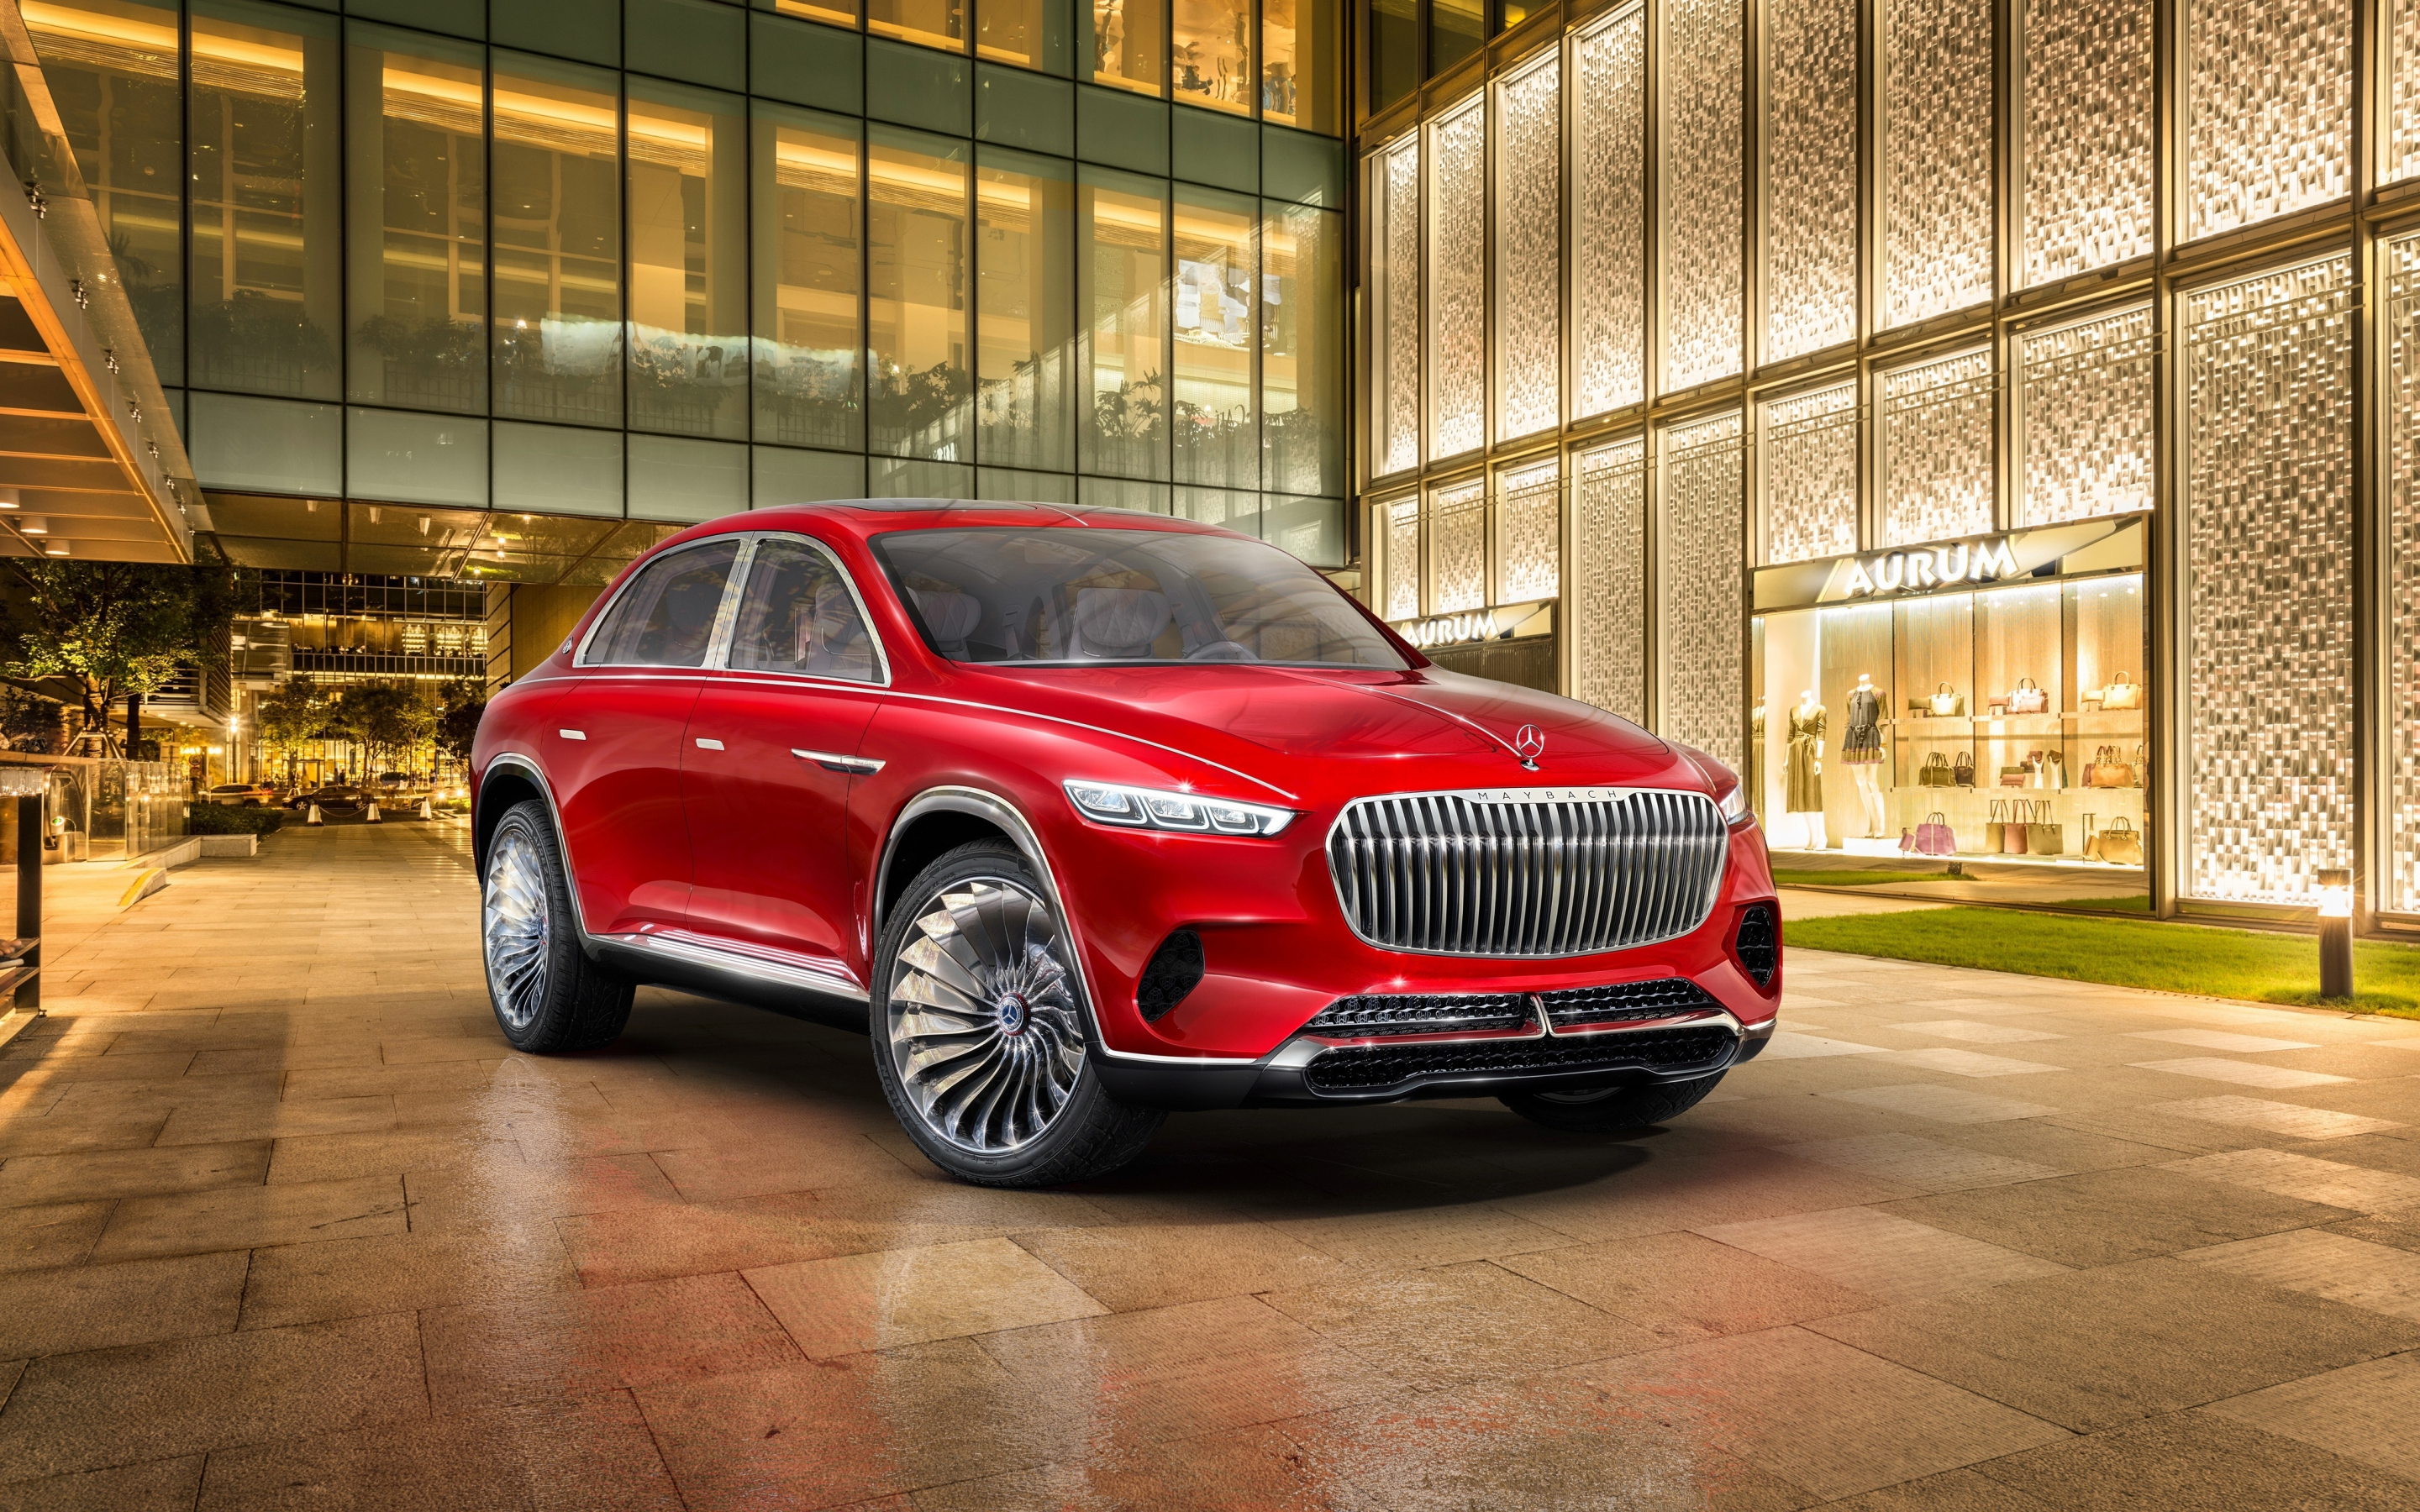 2018 Vision Mercedes-Maybach Ultimate Luxury, concept car, red, 2880x1800 wallpaper